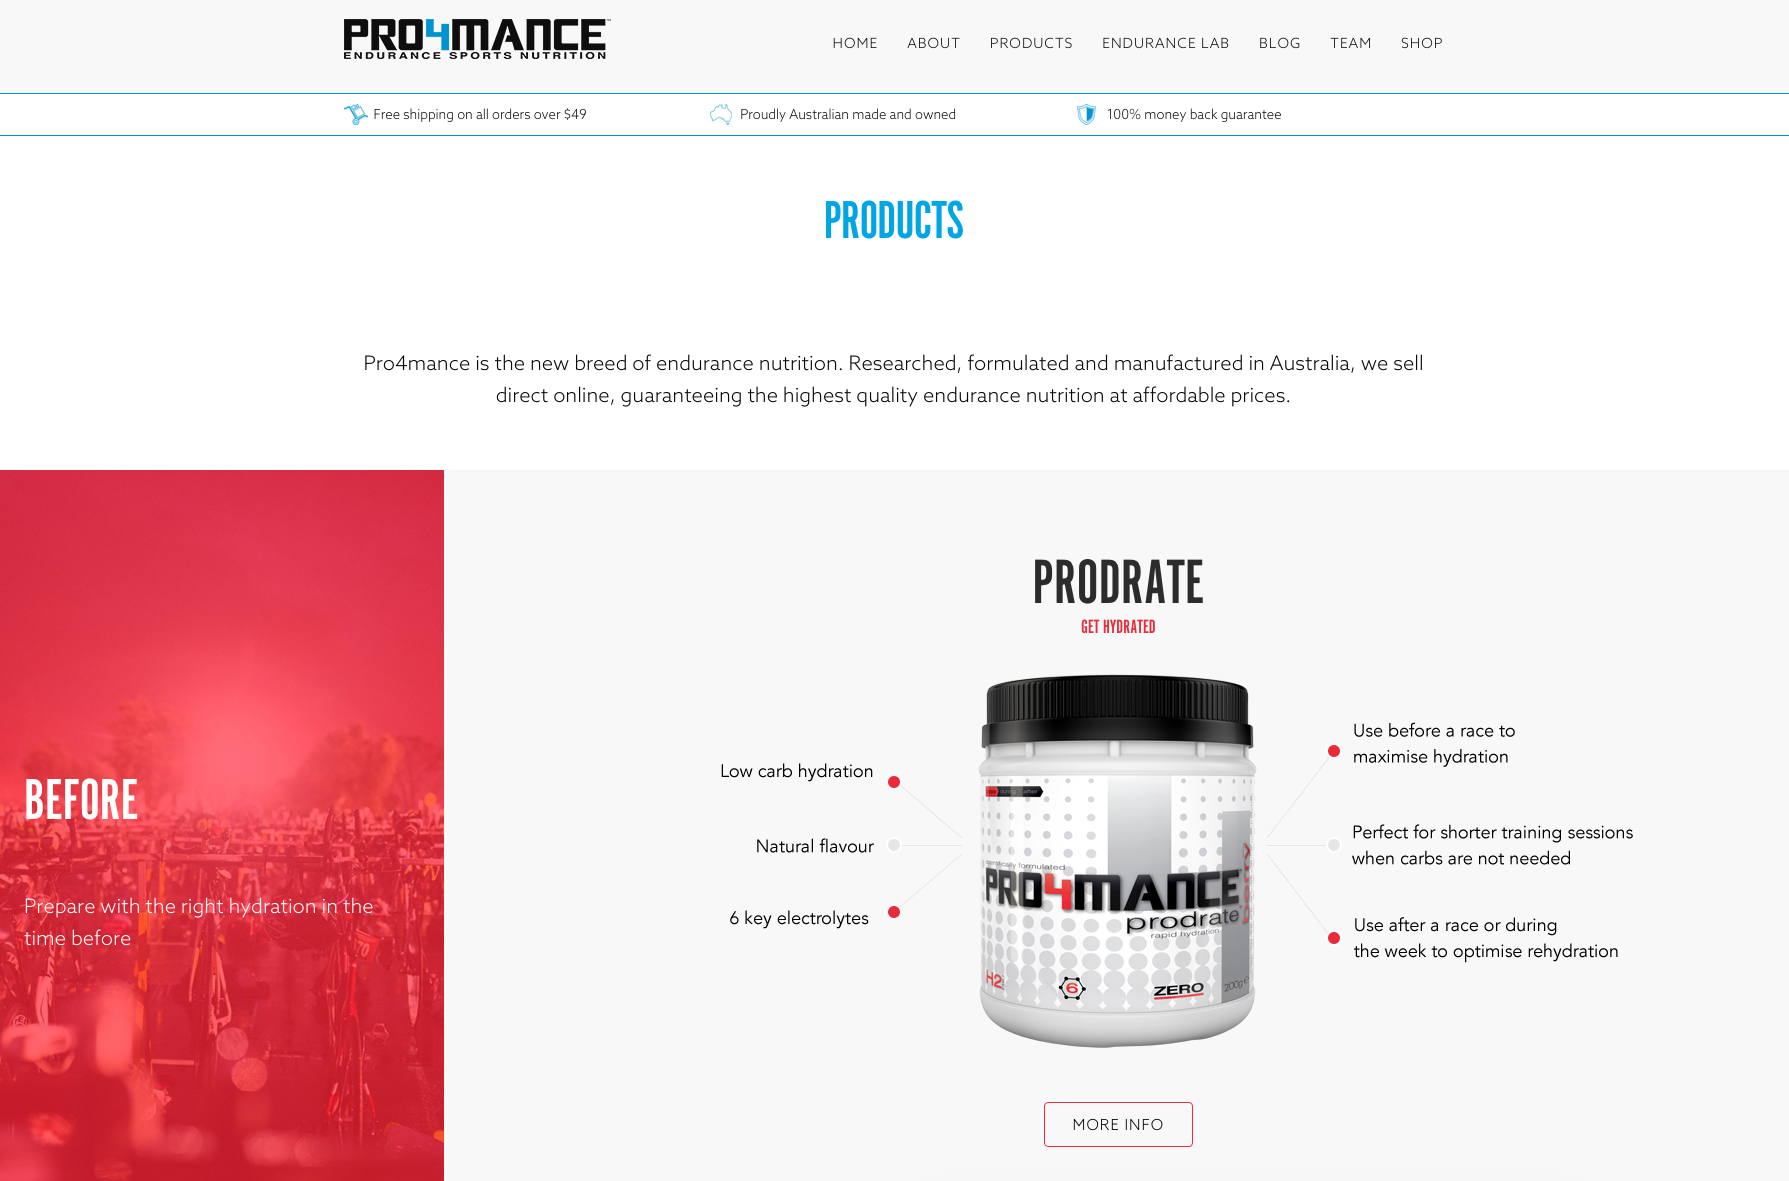 Pro4mance uses a highly customized version of Storefront.